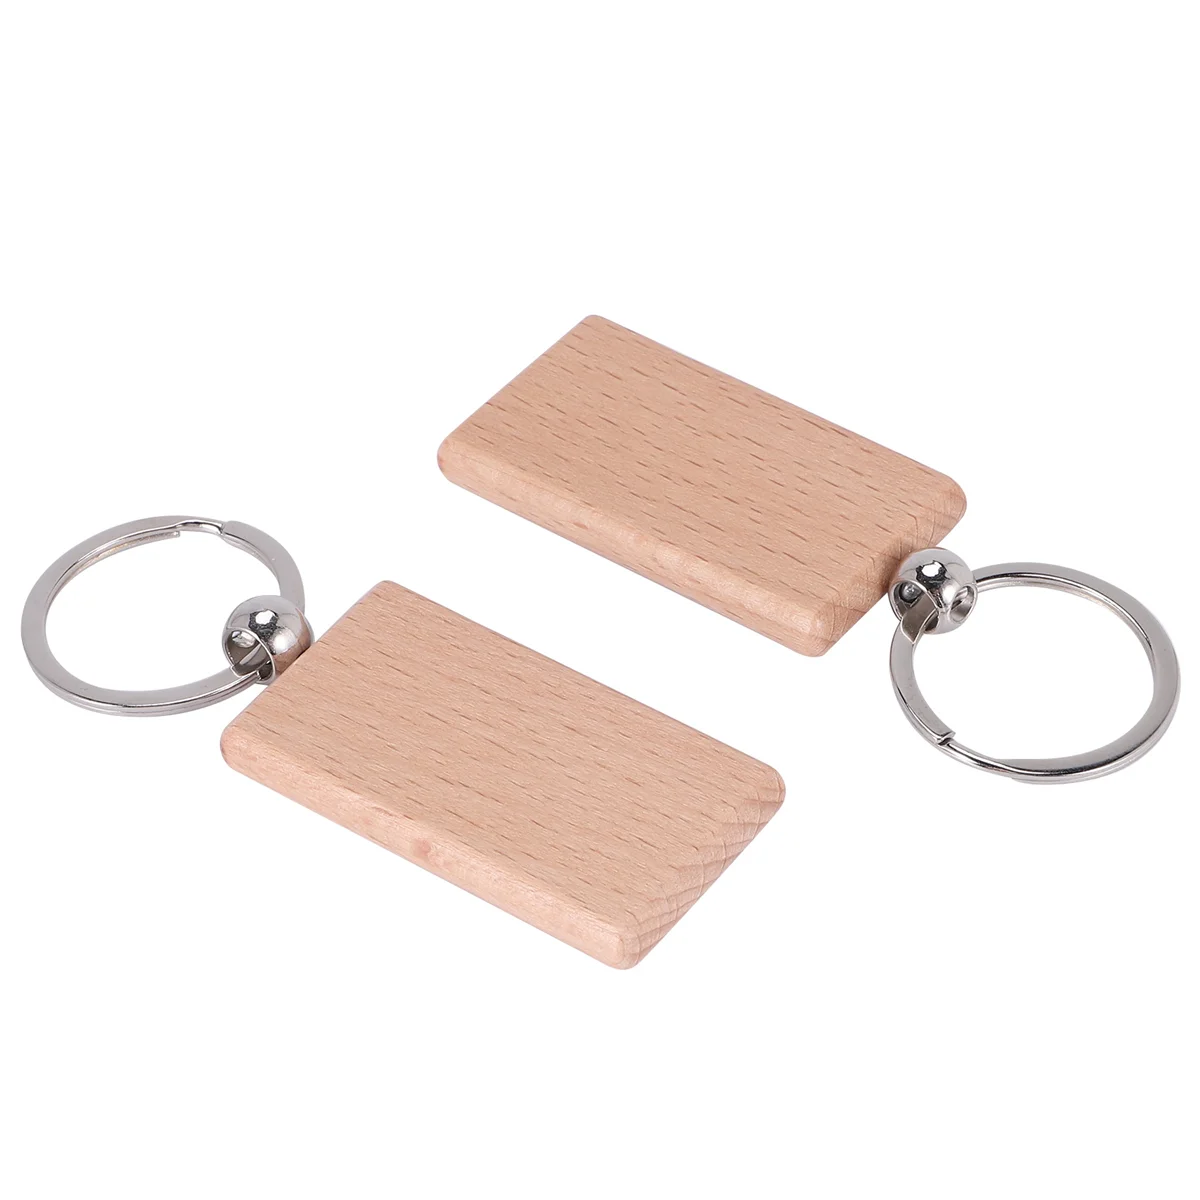 

40 Pcs Blank Wooden Keychain Rectangular Engraving Key Diy Wood Keychains Key Tags Can Engrave Diy Gifts